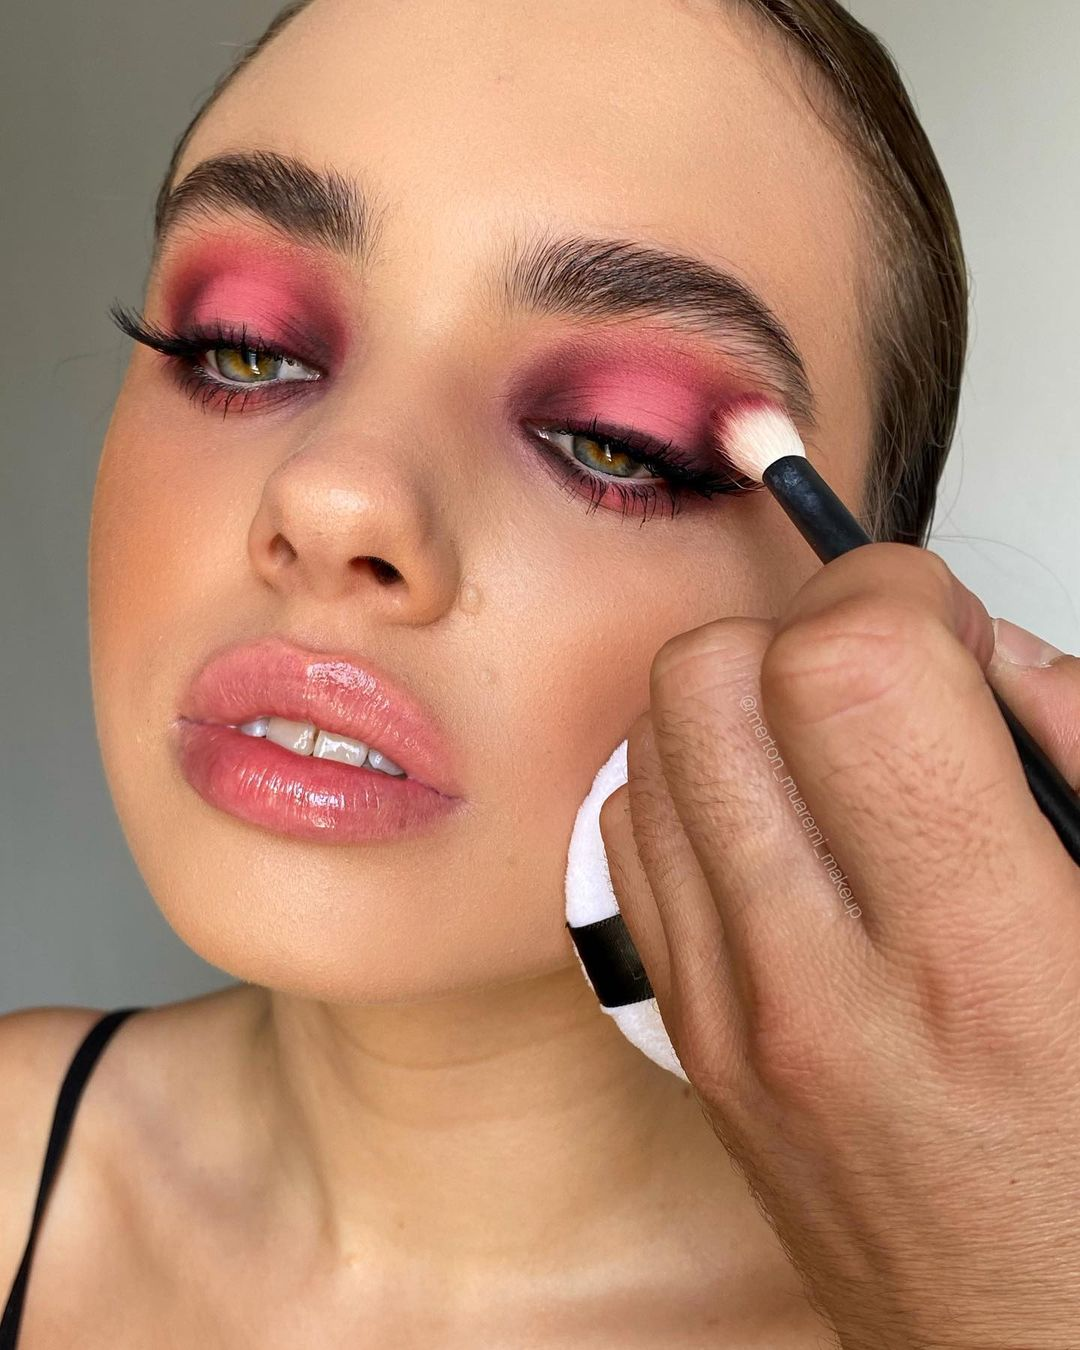 How To Wear Pink Eyeshadow? Here Are 13 Stunning Looks For You To Try